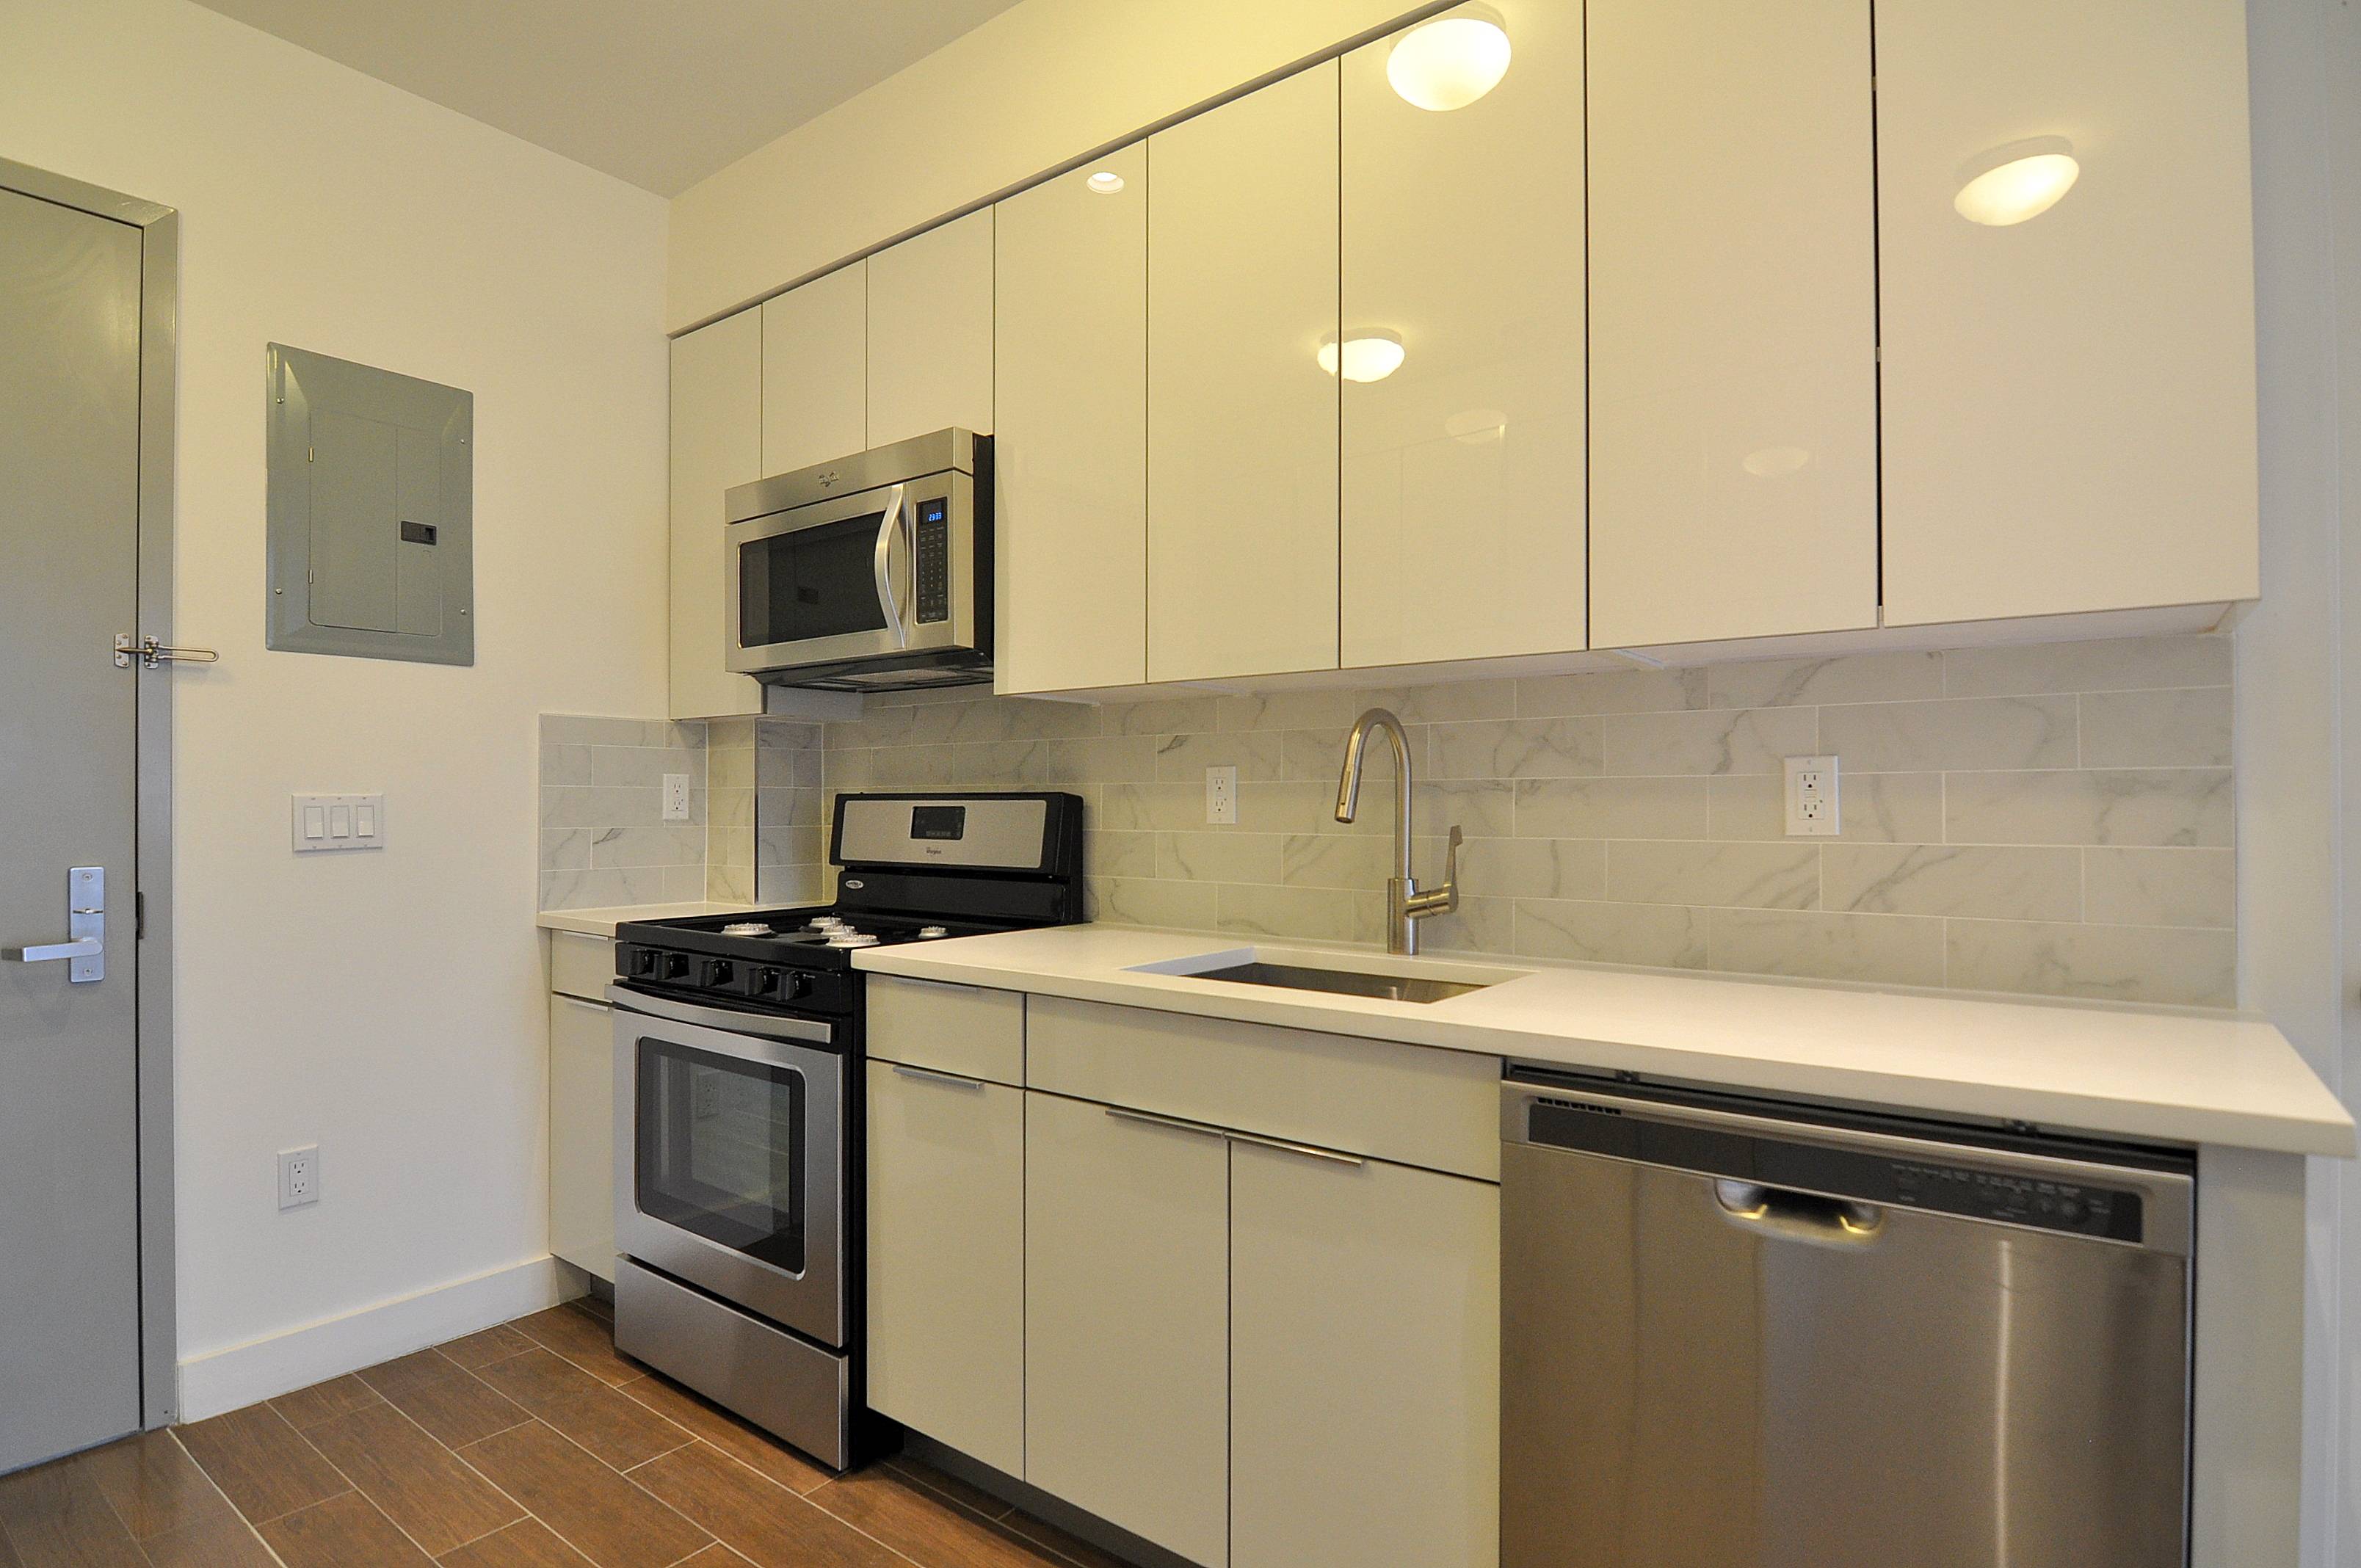 Brand New 2 Bedroom For Rent! Motivated Owner & No Board Approval!